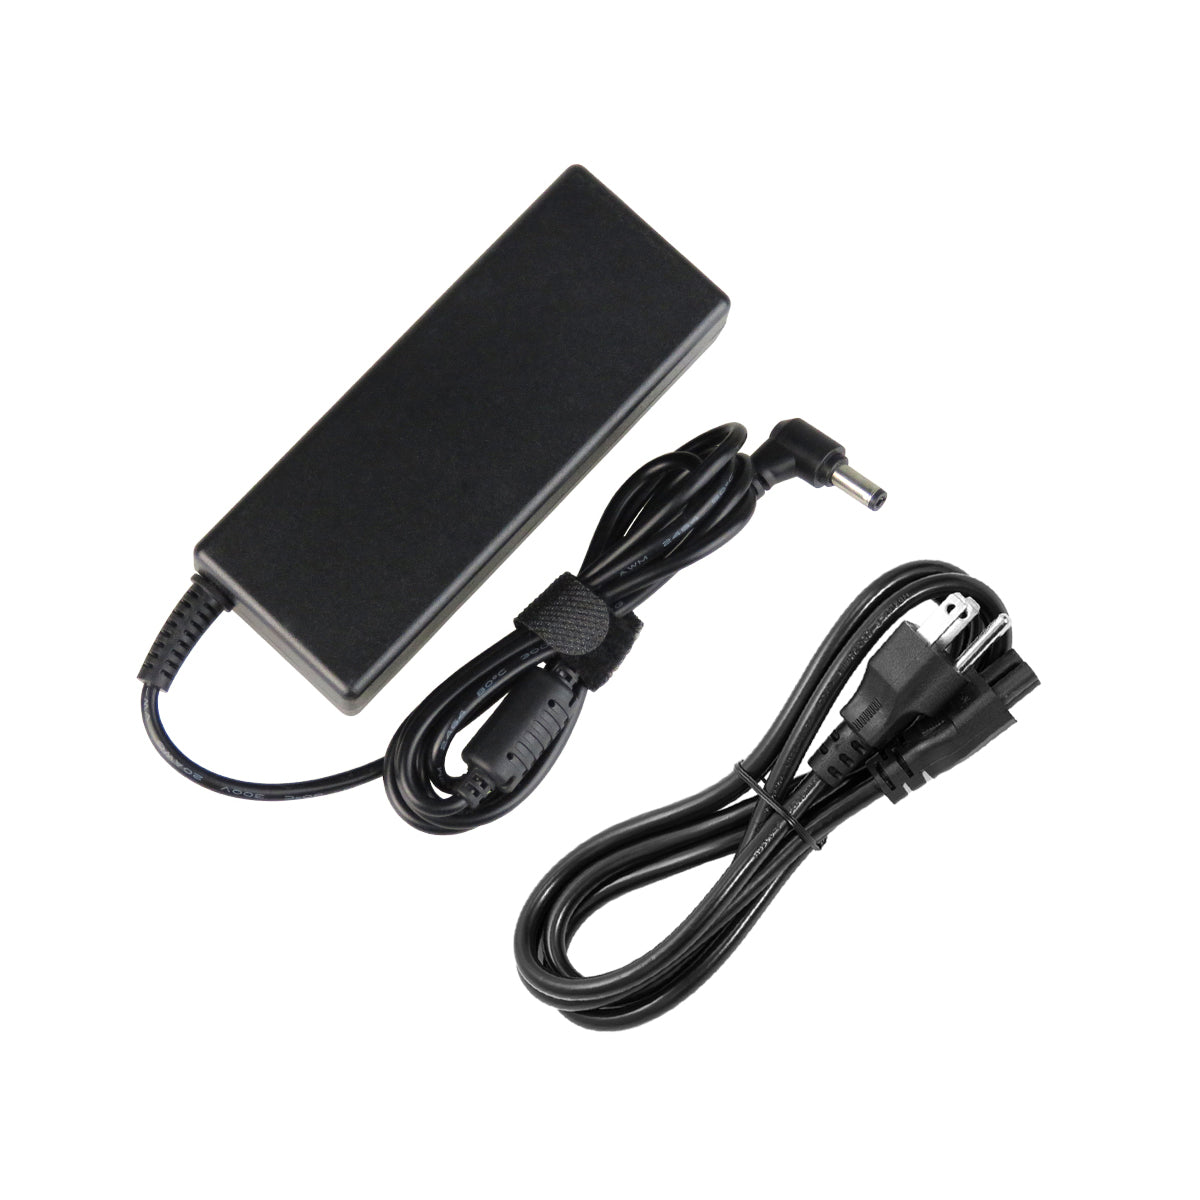 AC Adapter Charger for Gateway M-78 Notebook.